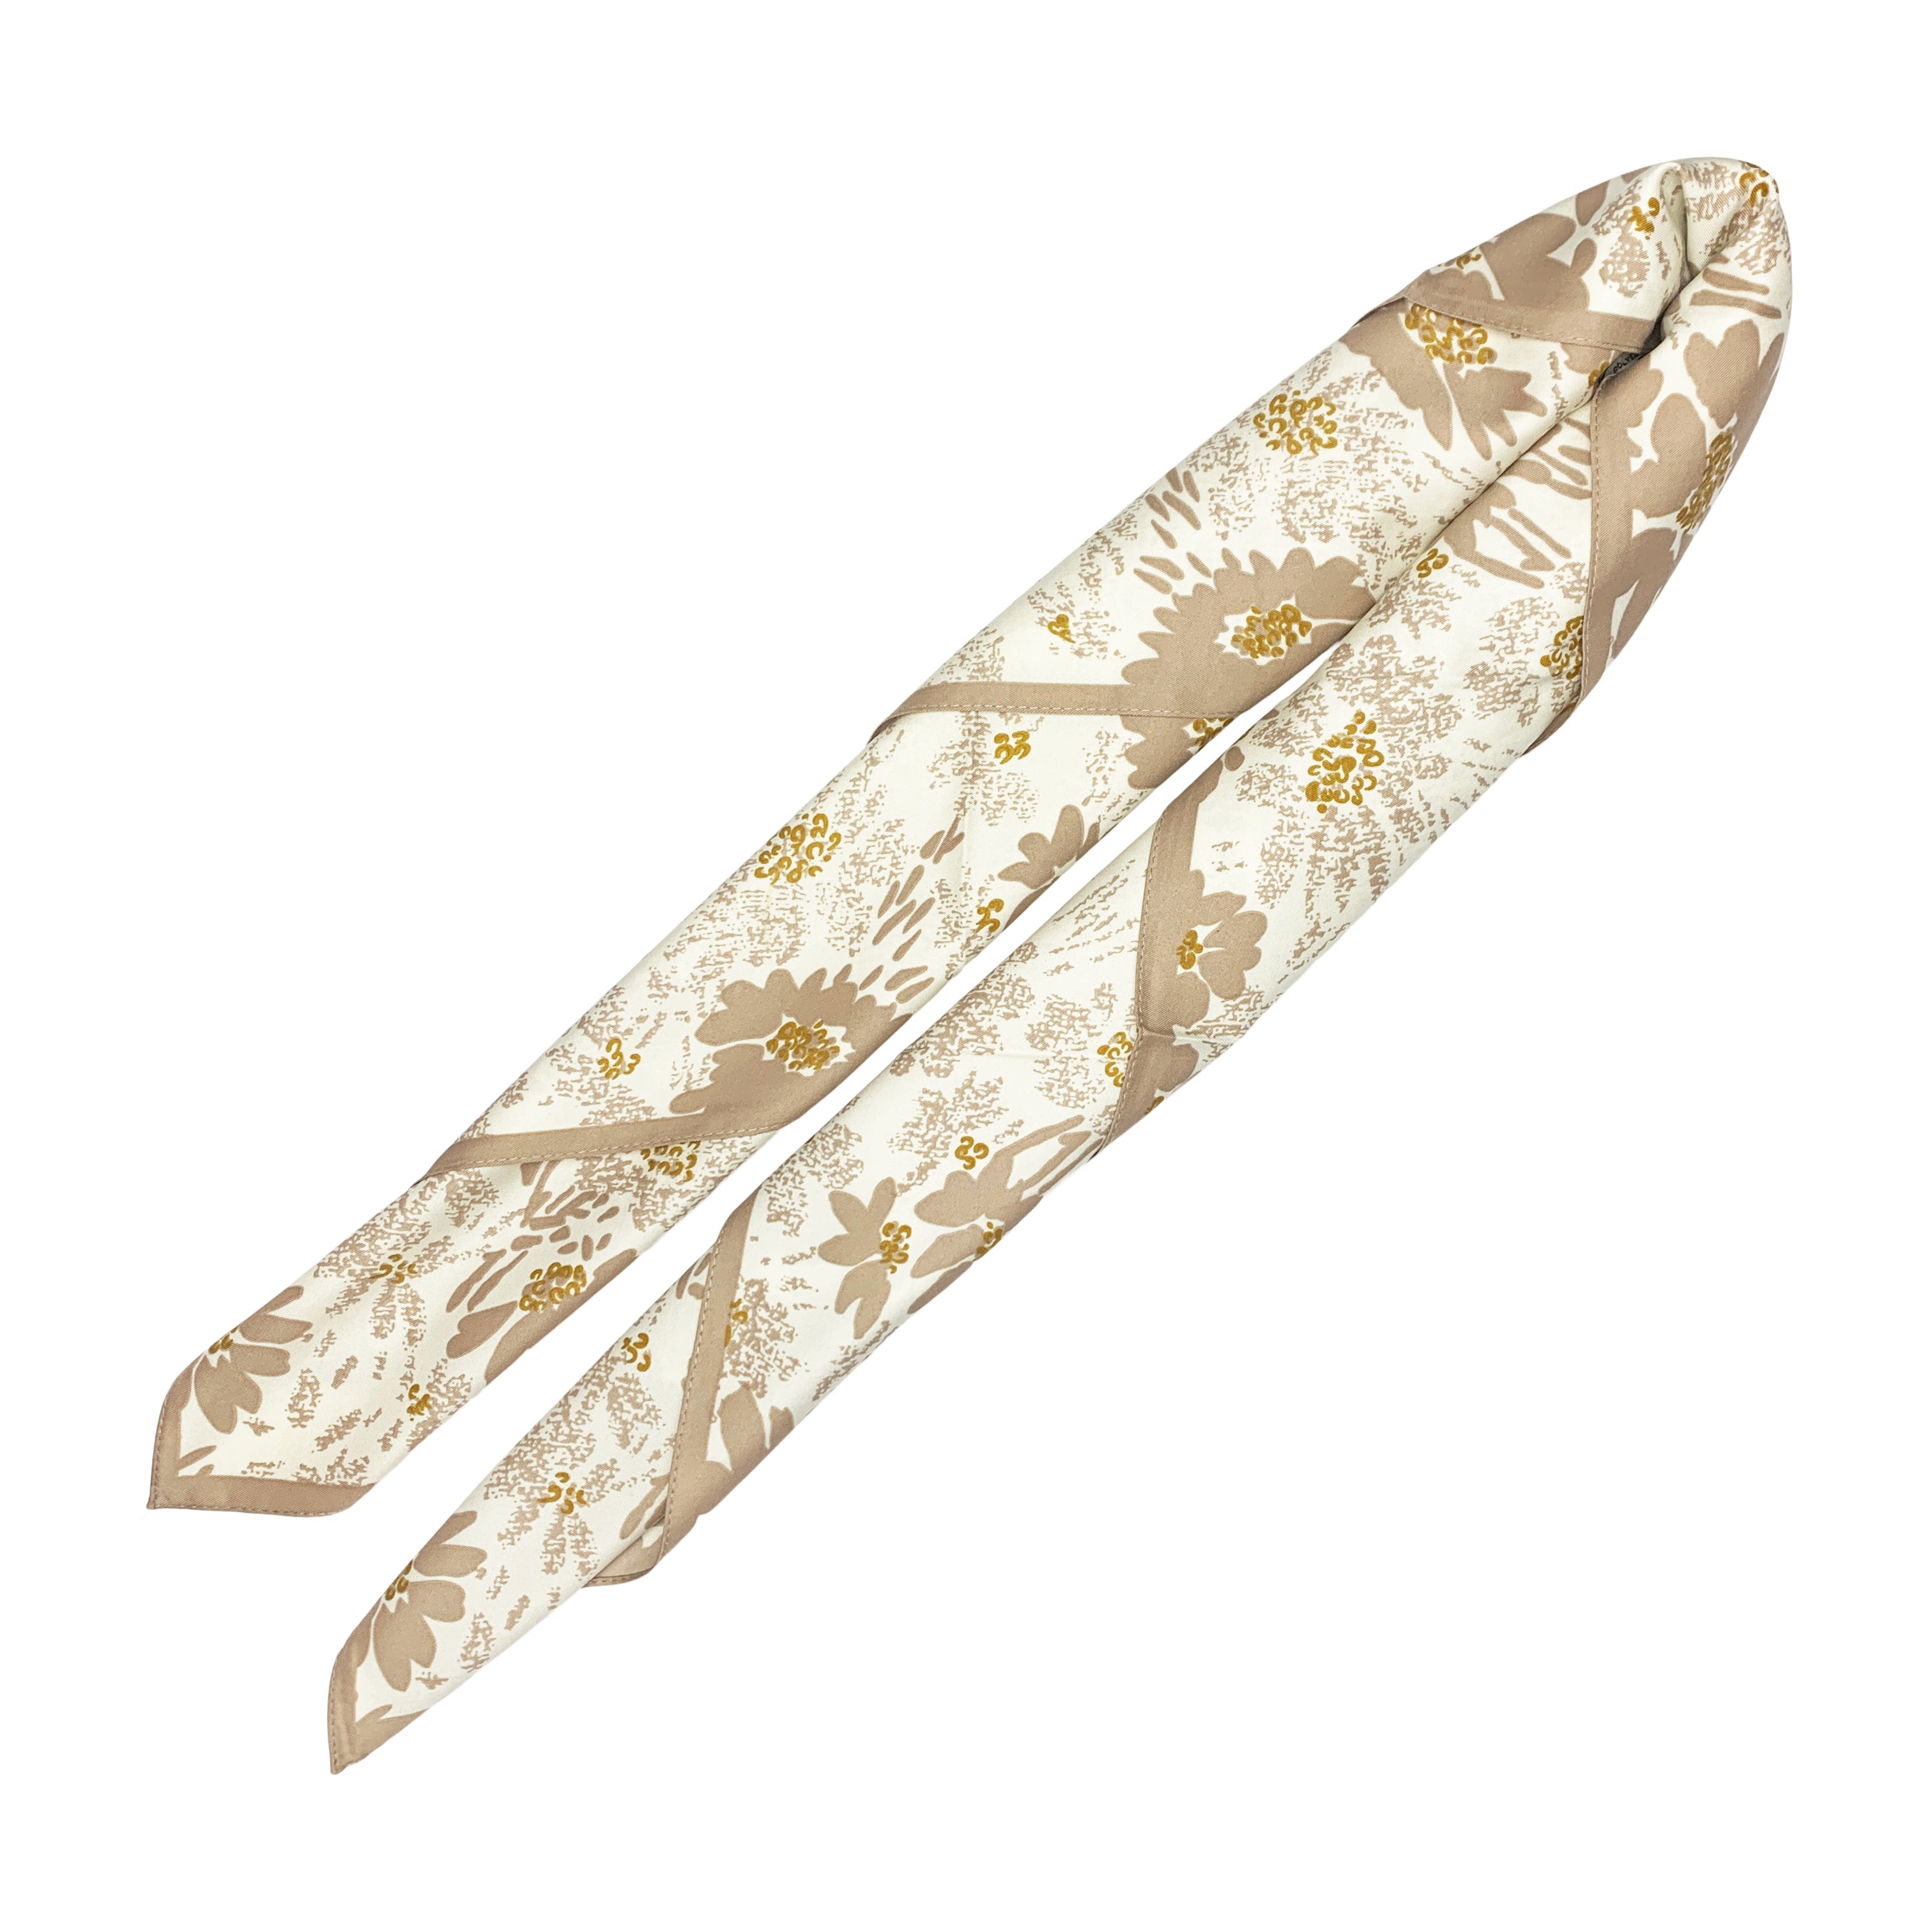 Avenue Zoe Floral Speckled Printed Silky Bandana Scarf in Beige